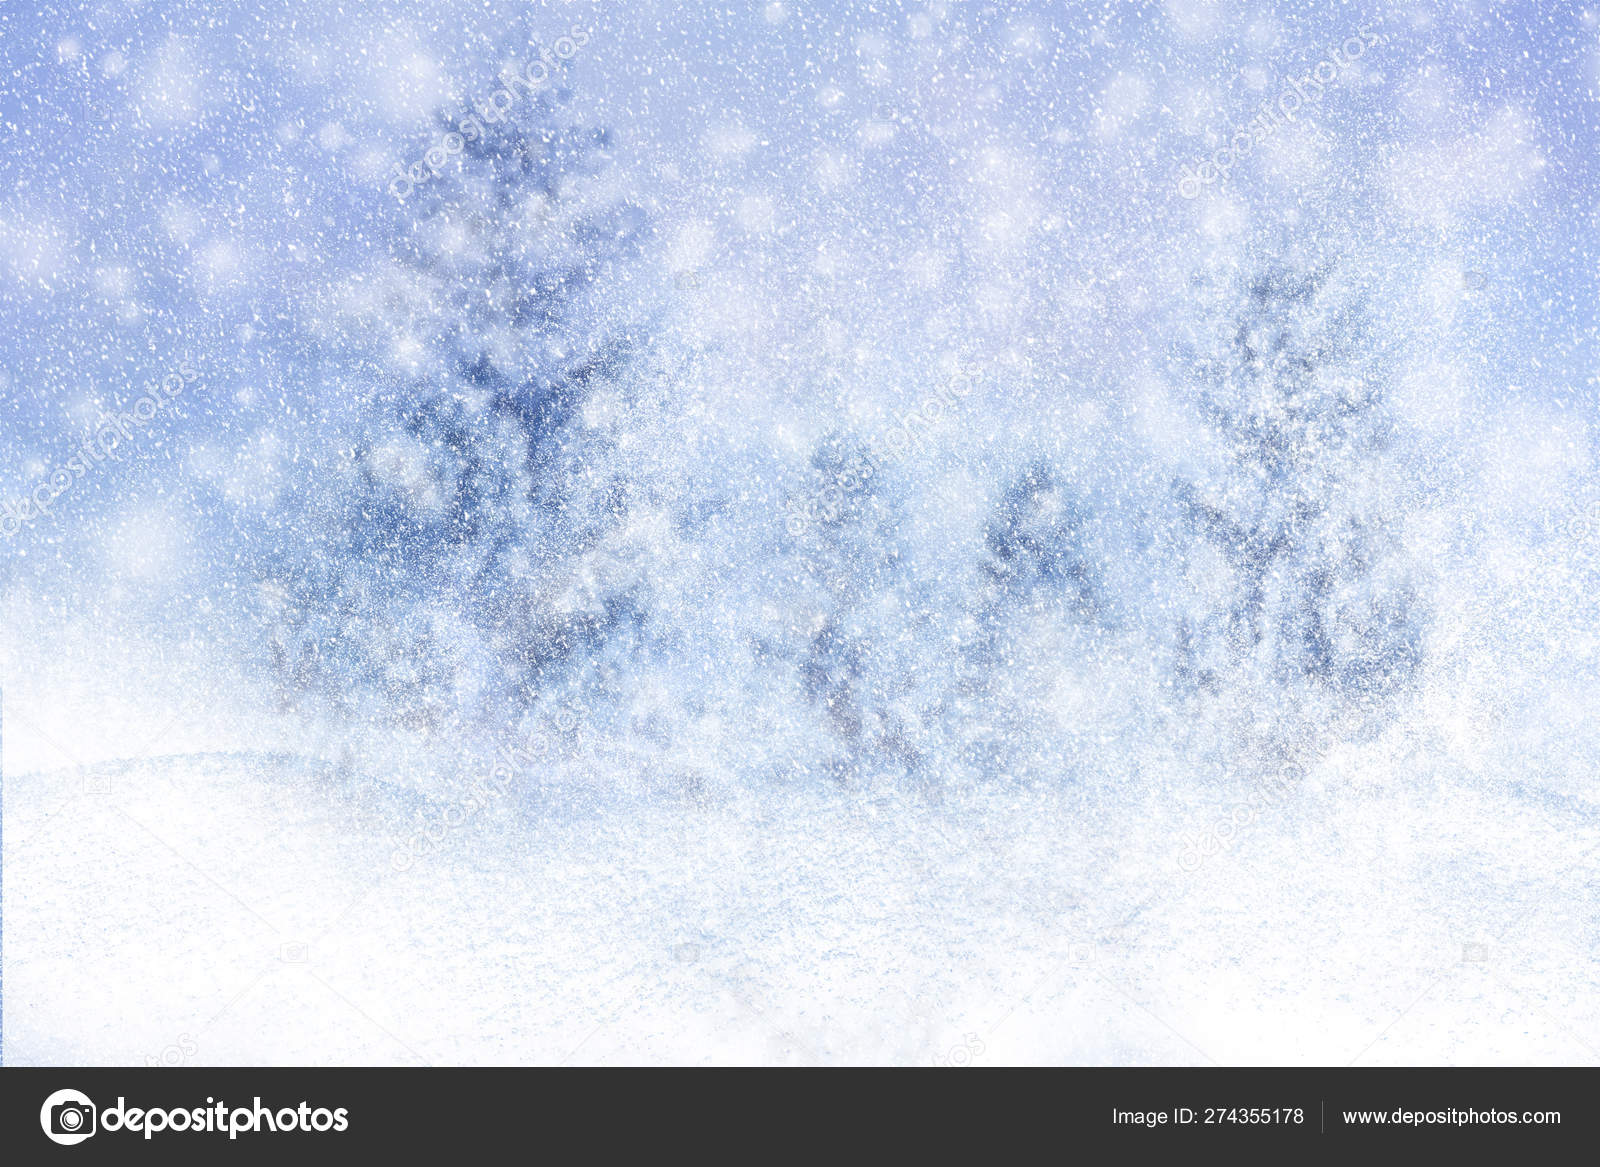 Winter Background Of Snow And Frost With Free Space For Your